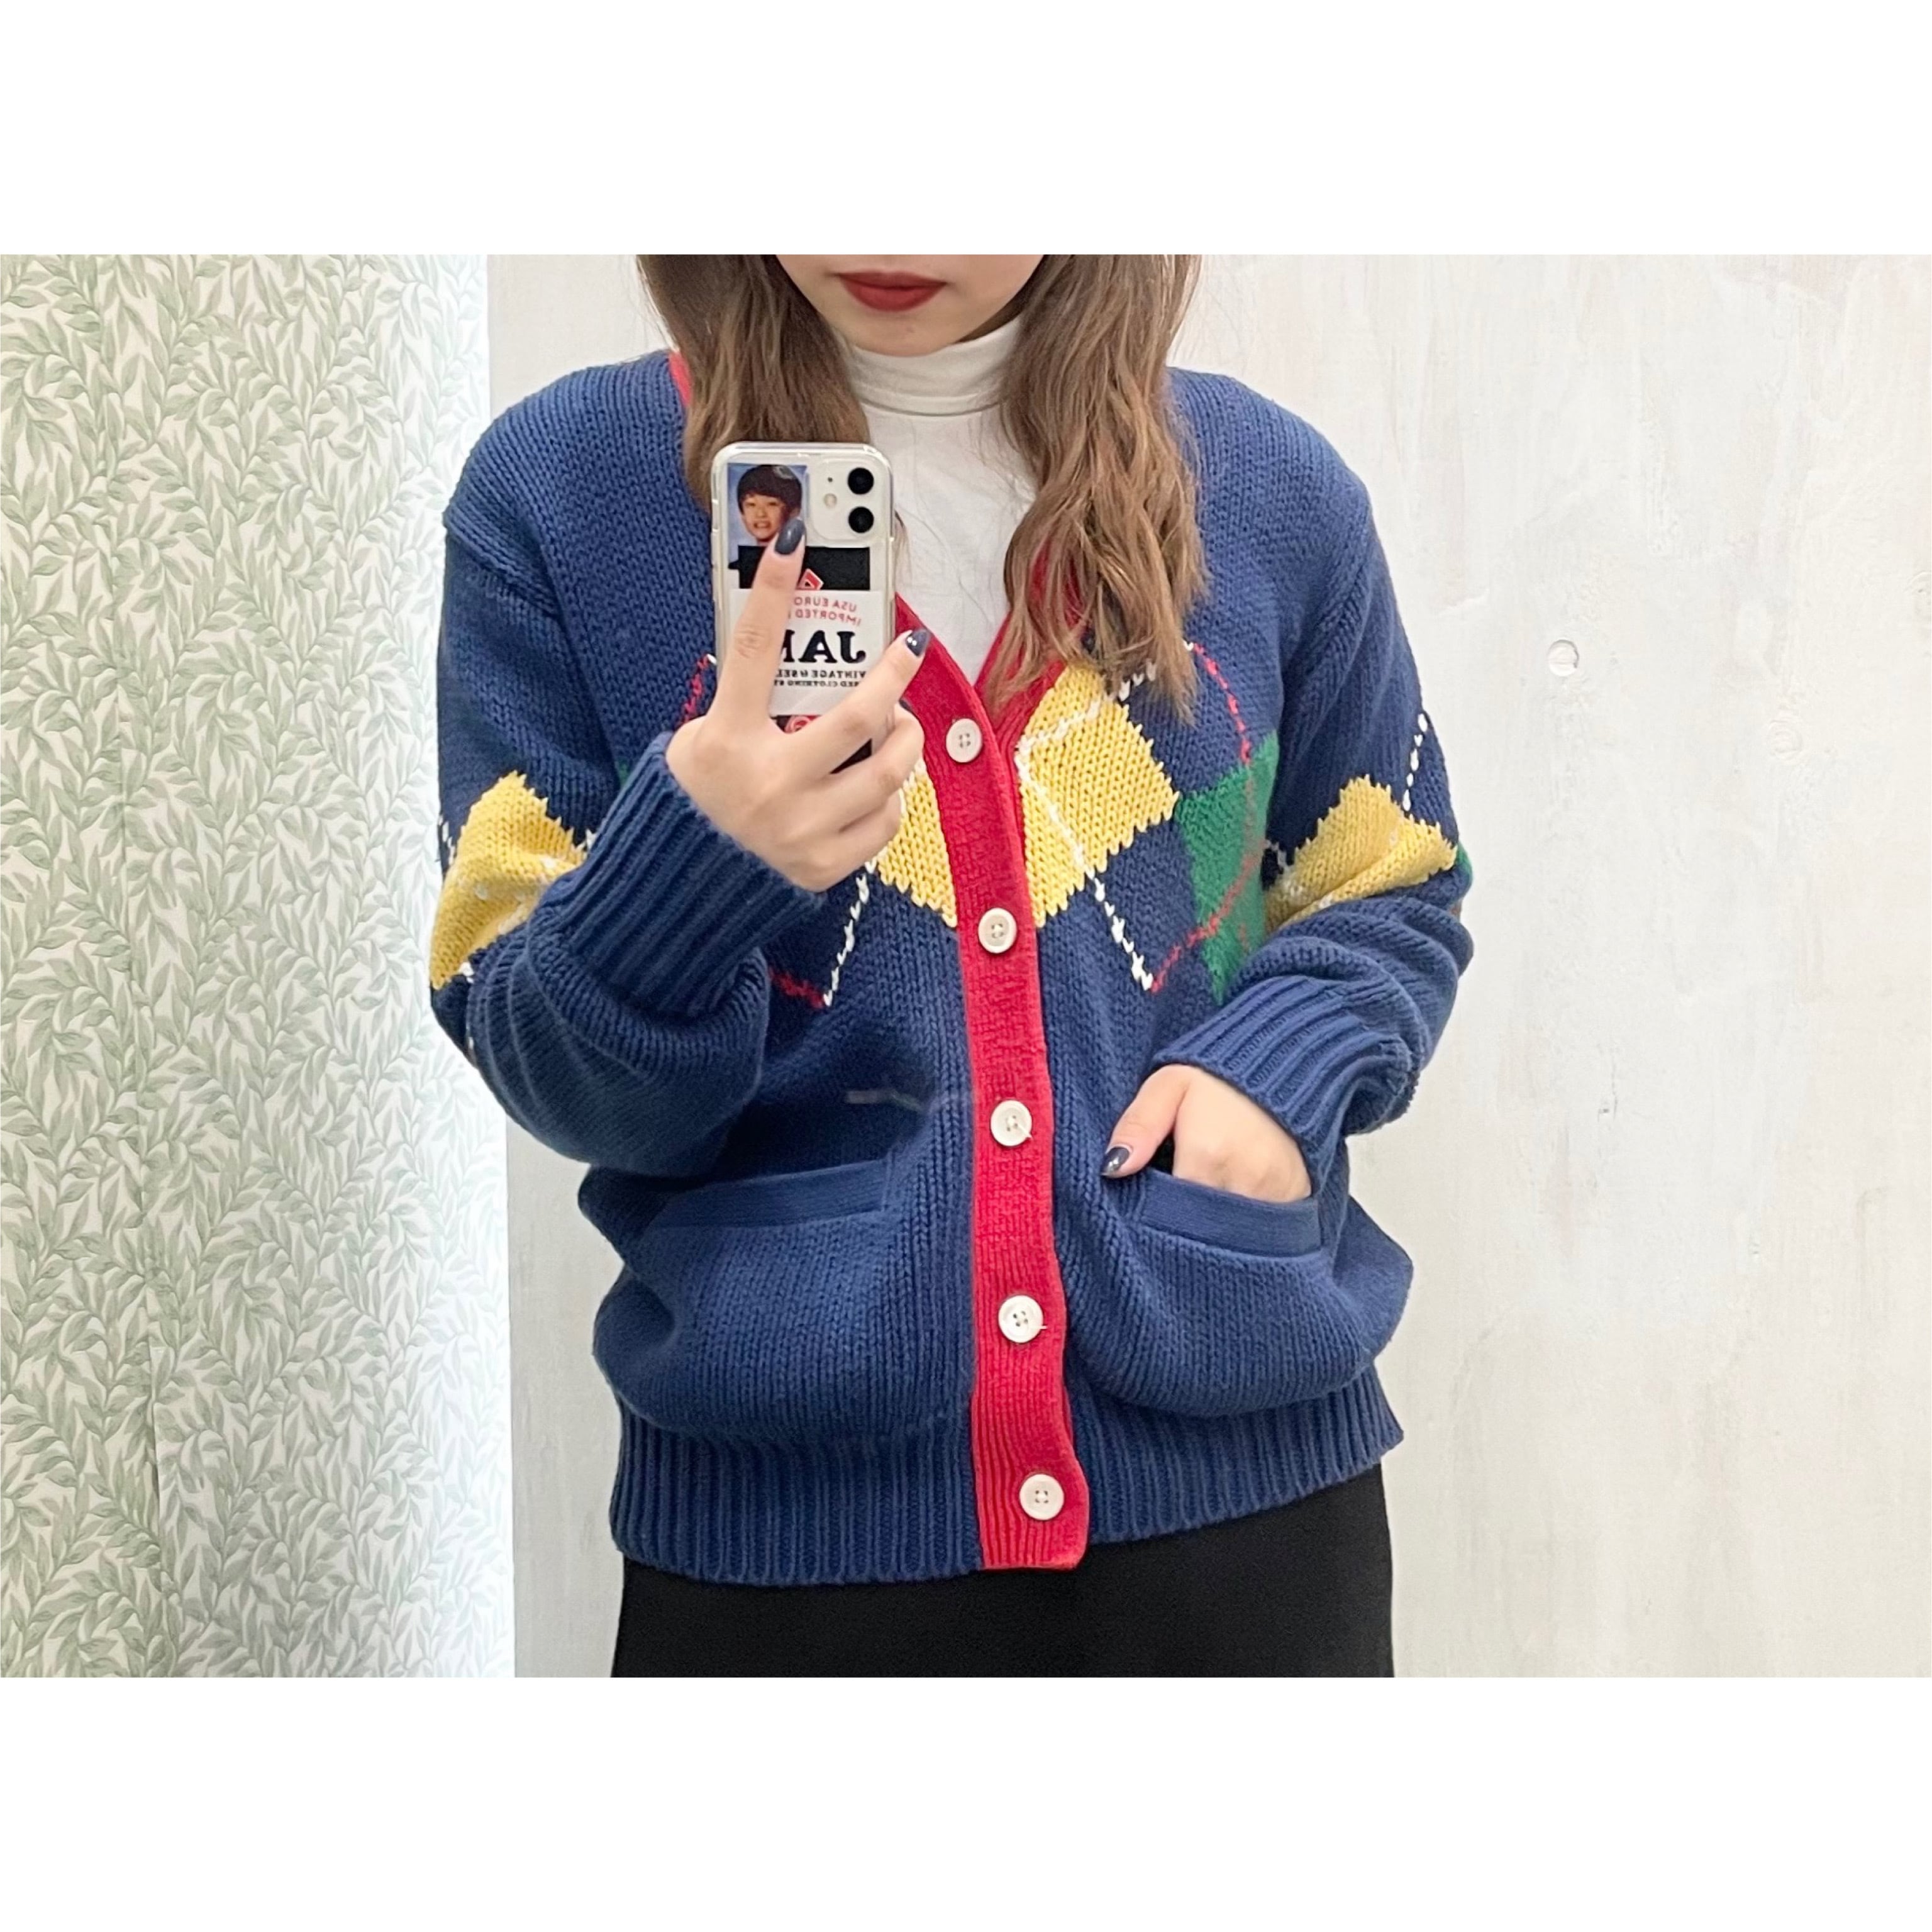 Ralph Lauren/cardigan/colorful/knit/navy/red/yellow/green/ラルフ